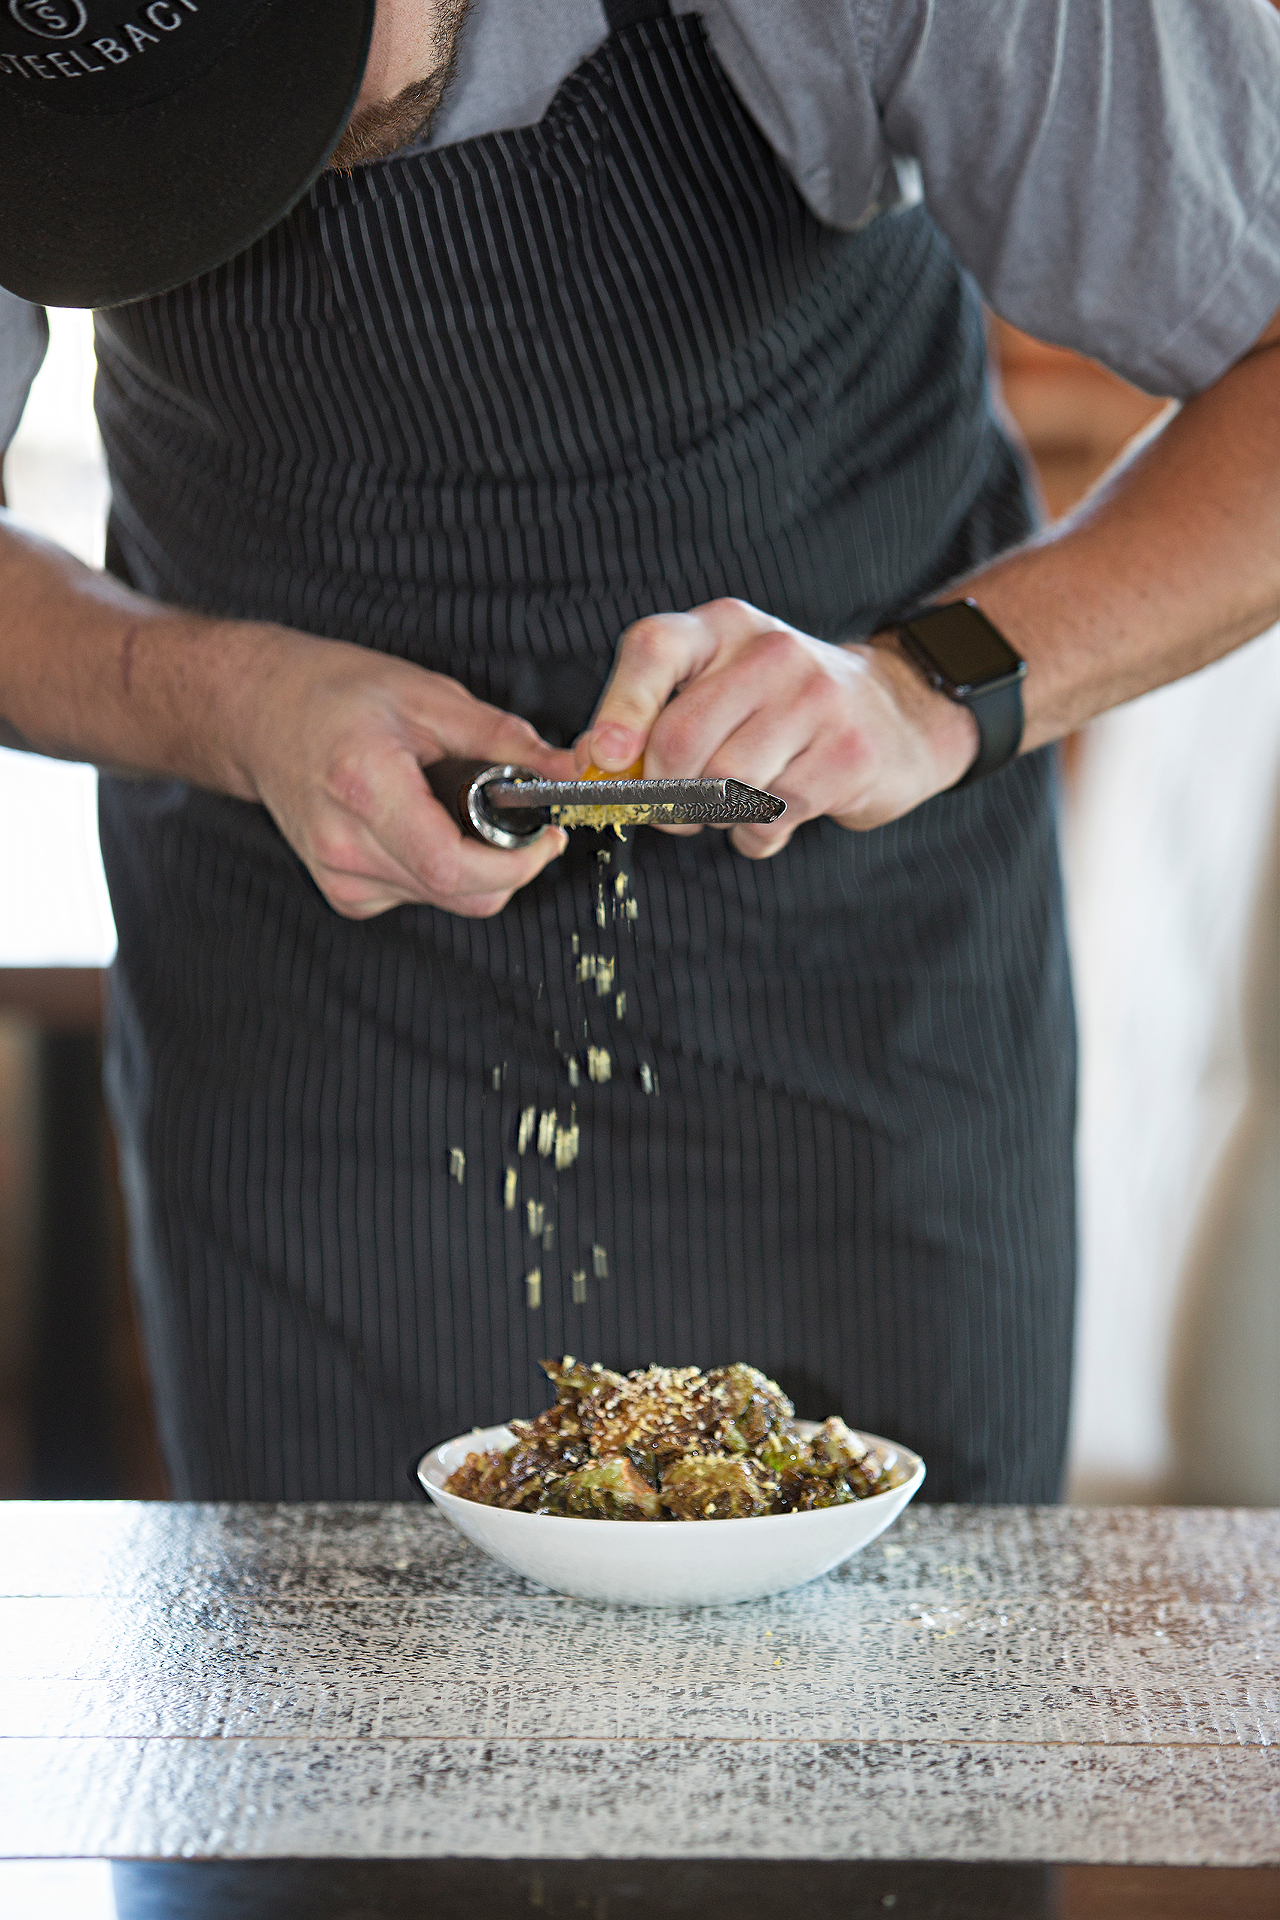 Steelbach chef-partner Nathan Hardin uses a microplane grater on cured egg yolk, adding flavor to Brussels sprouts.